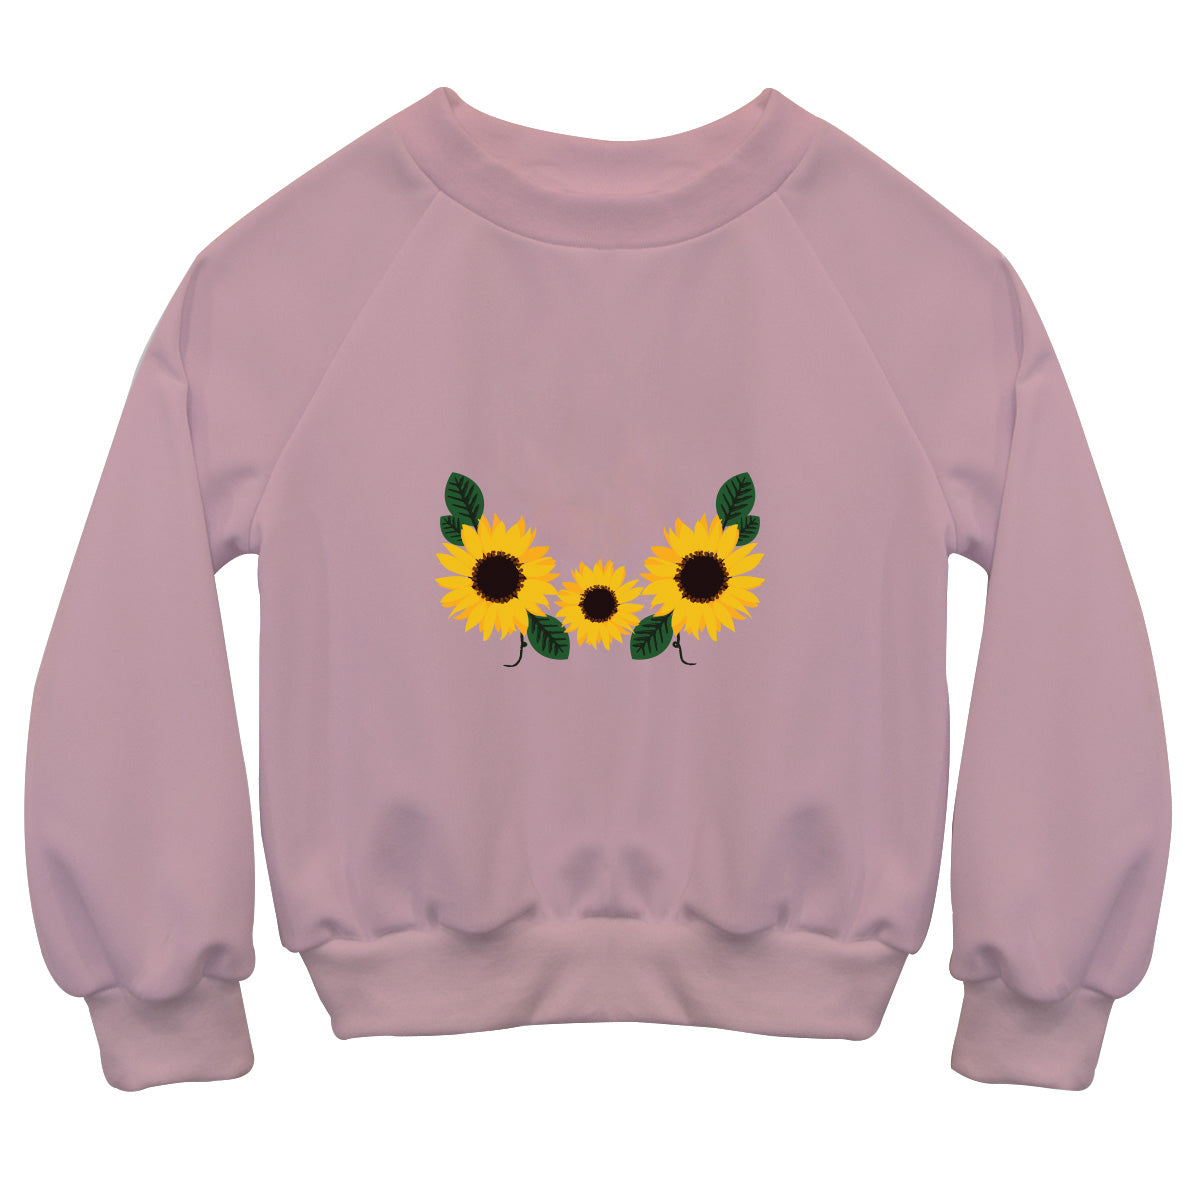 Girls pink sunflowers sweater with monogram - Wimziy&Co.